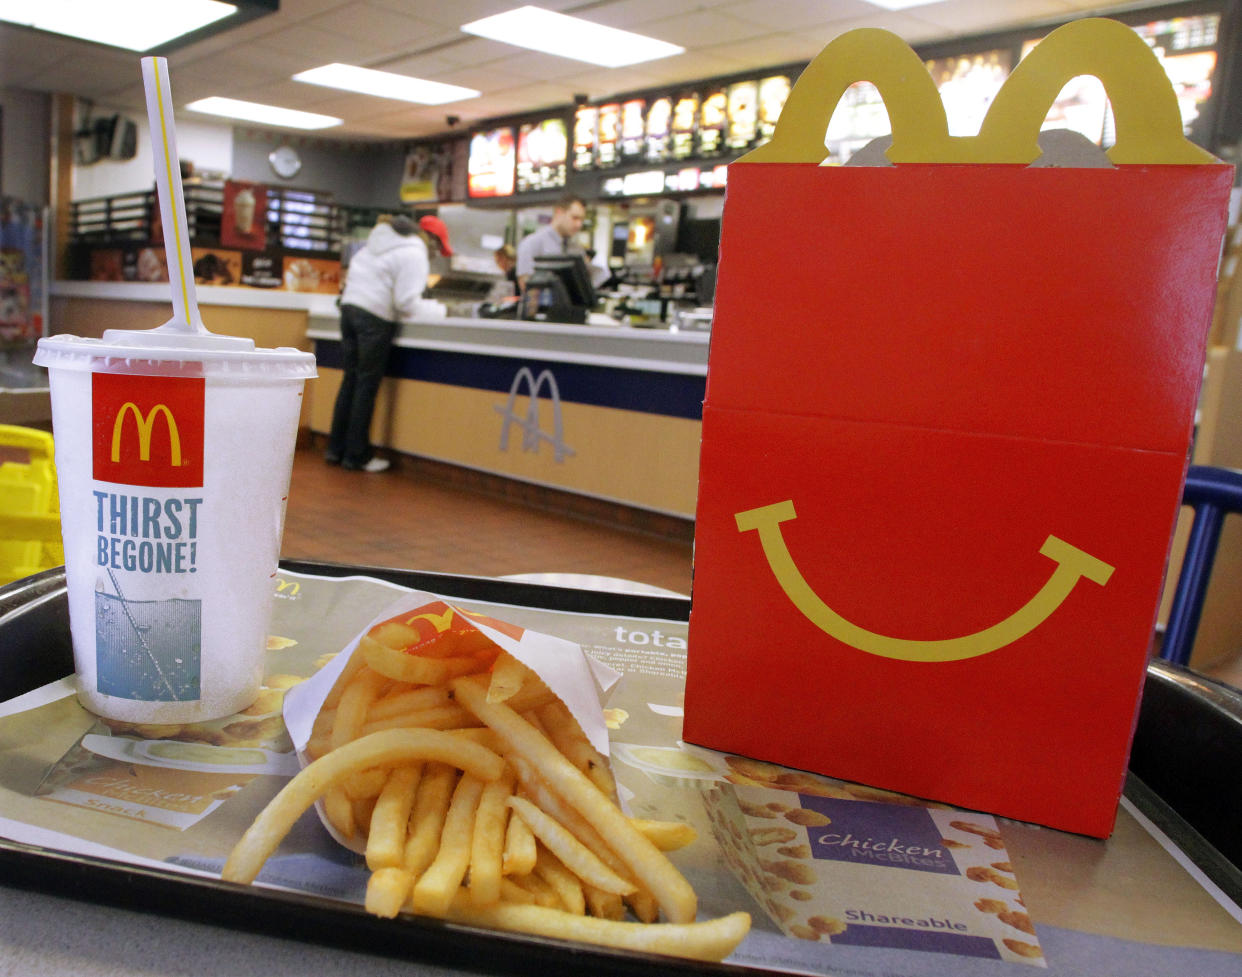 In this Jan. 20, 2012 photo, the McDonald's logo and a Happy Meal box with french fries and a drink are posed at McDonald's, in Springfield, Ill.  McDonald’s Corp. saw net income jump by 11 percent in the fourth quarter, as the fast-food giant continued to attract budget-conscious customers with low prices.  (AP Photo/Seth Perlman)